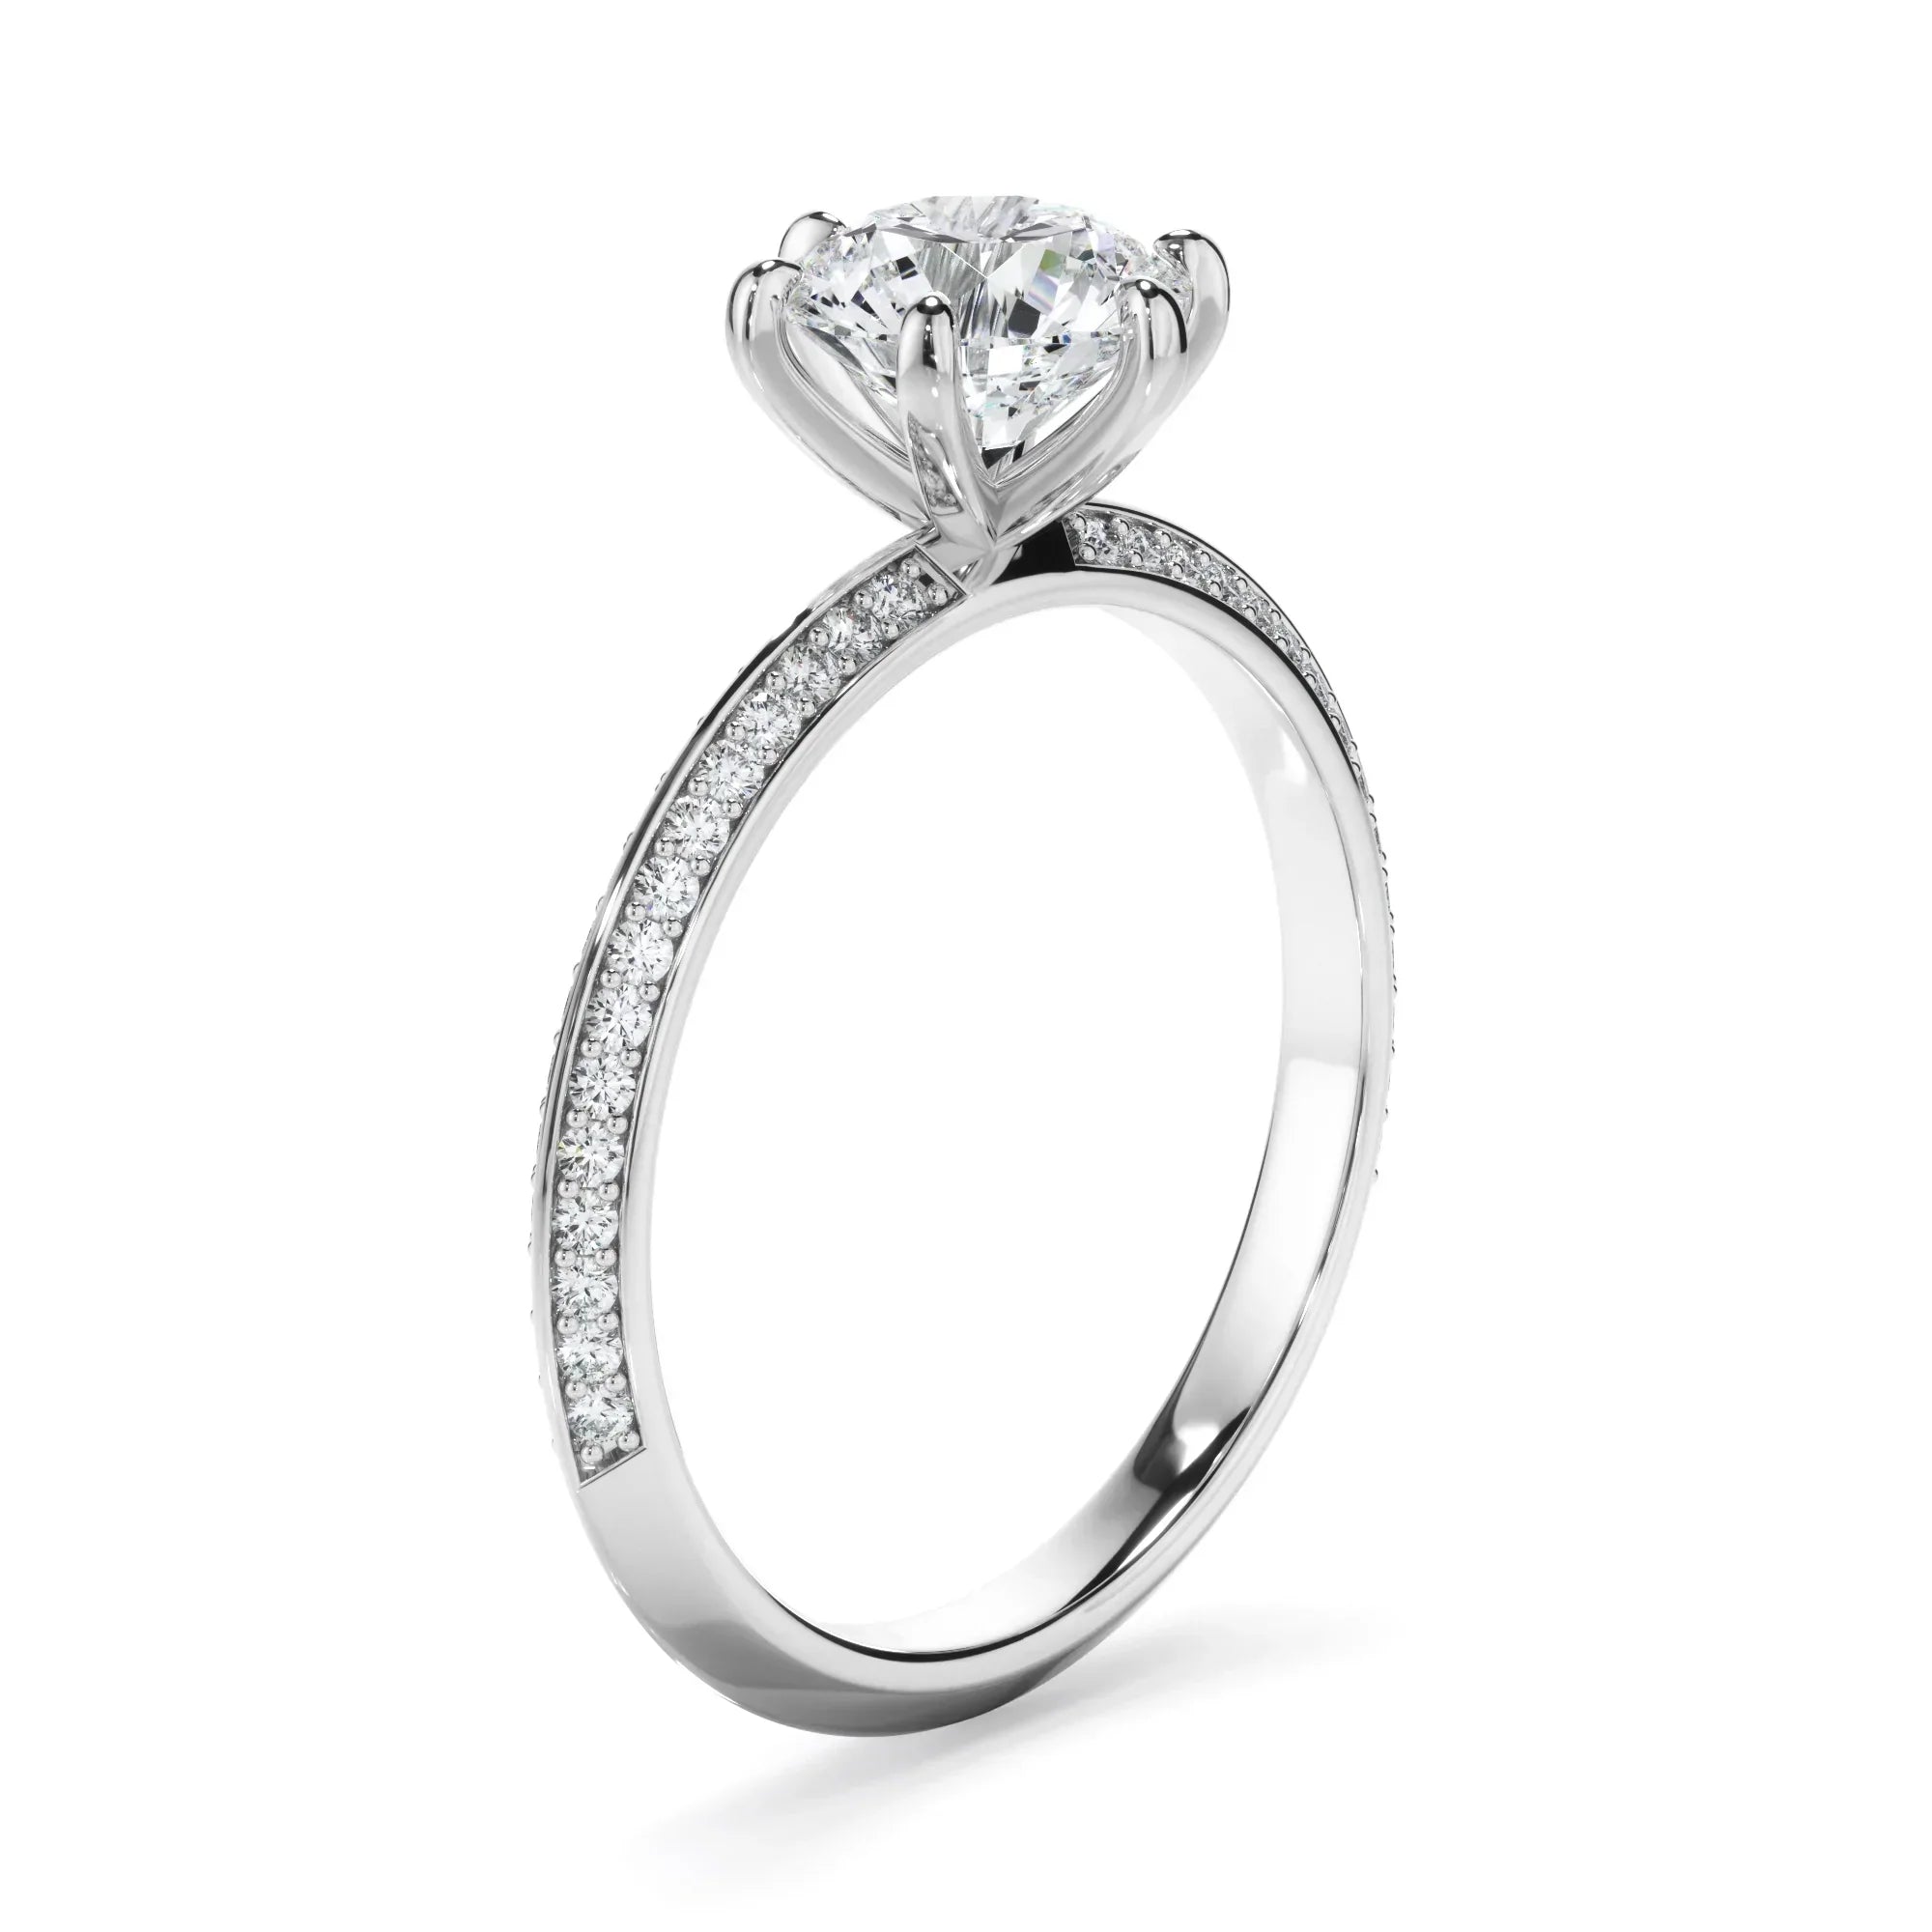 Round Brilliant Cut Diamond Knife Edge Engagement Ring With Diamond Pave Sides